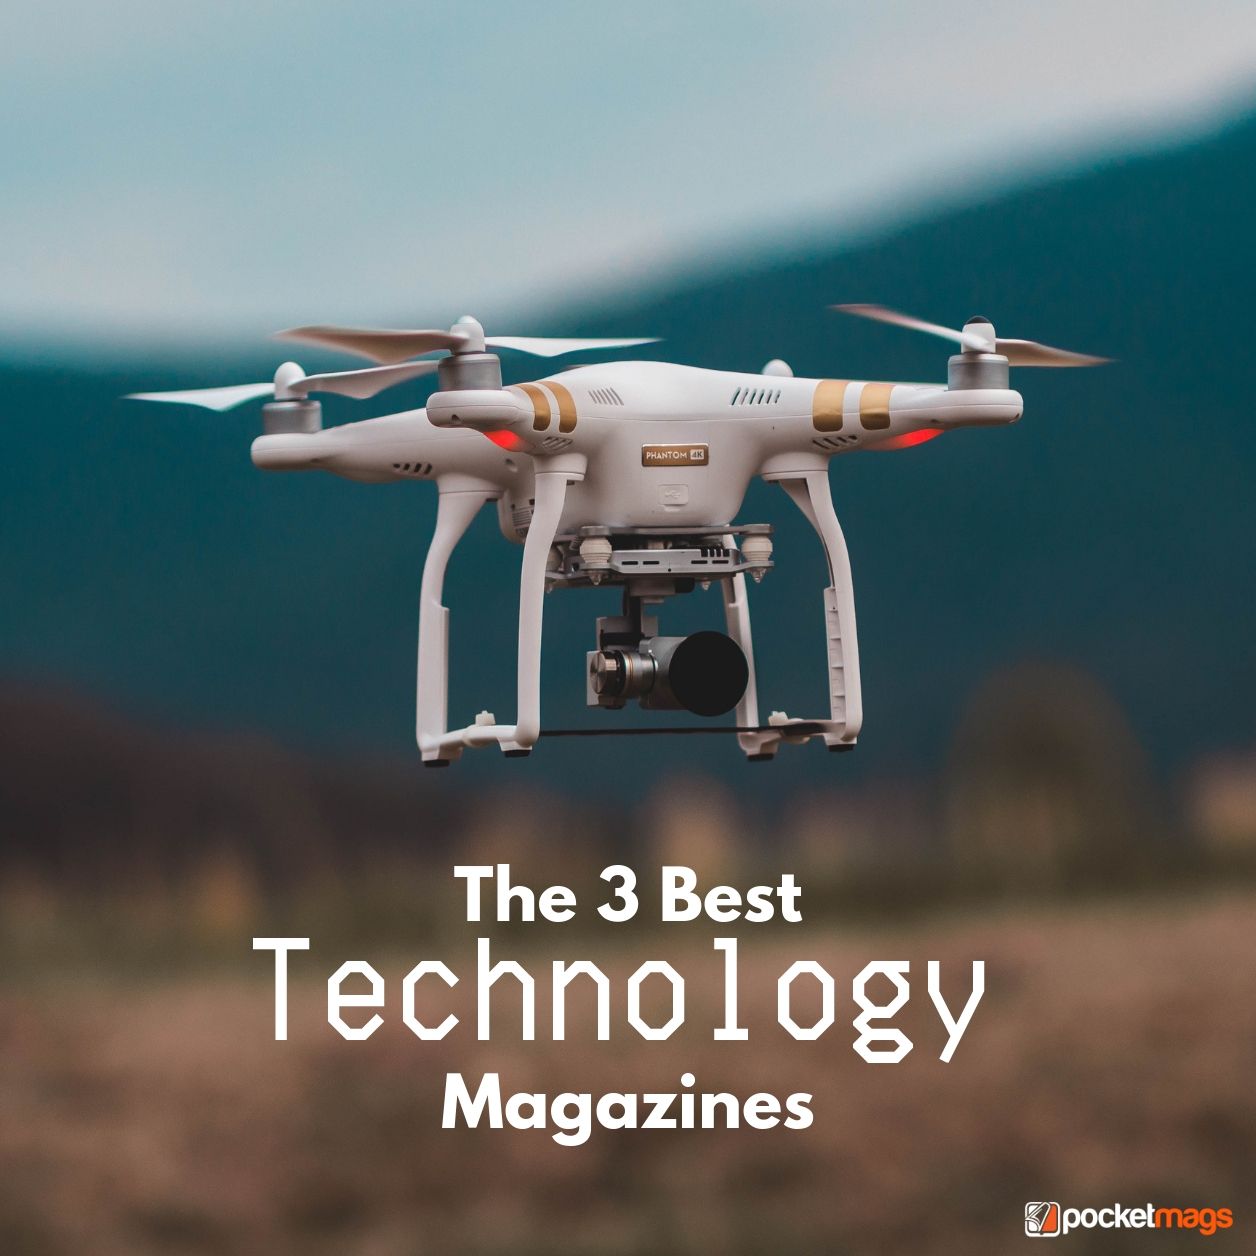 The 3 Best Technology Magazines